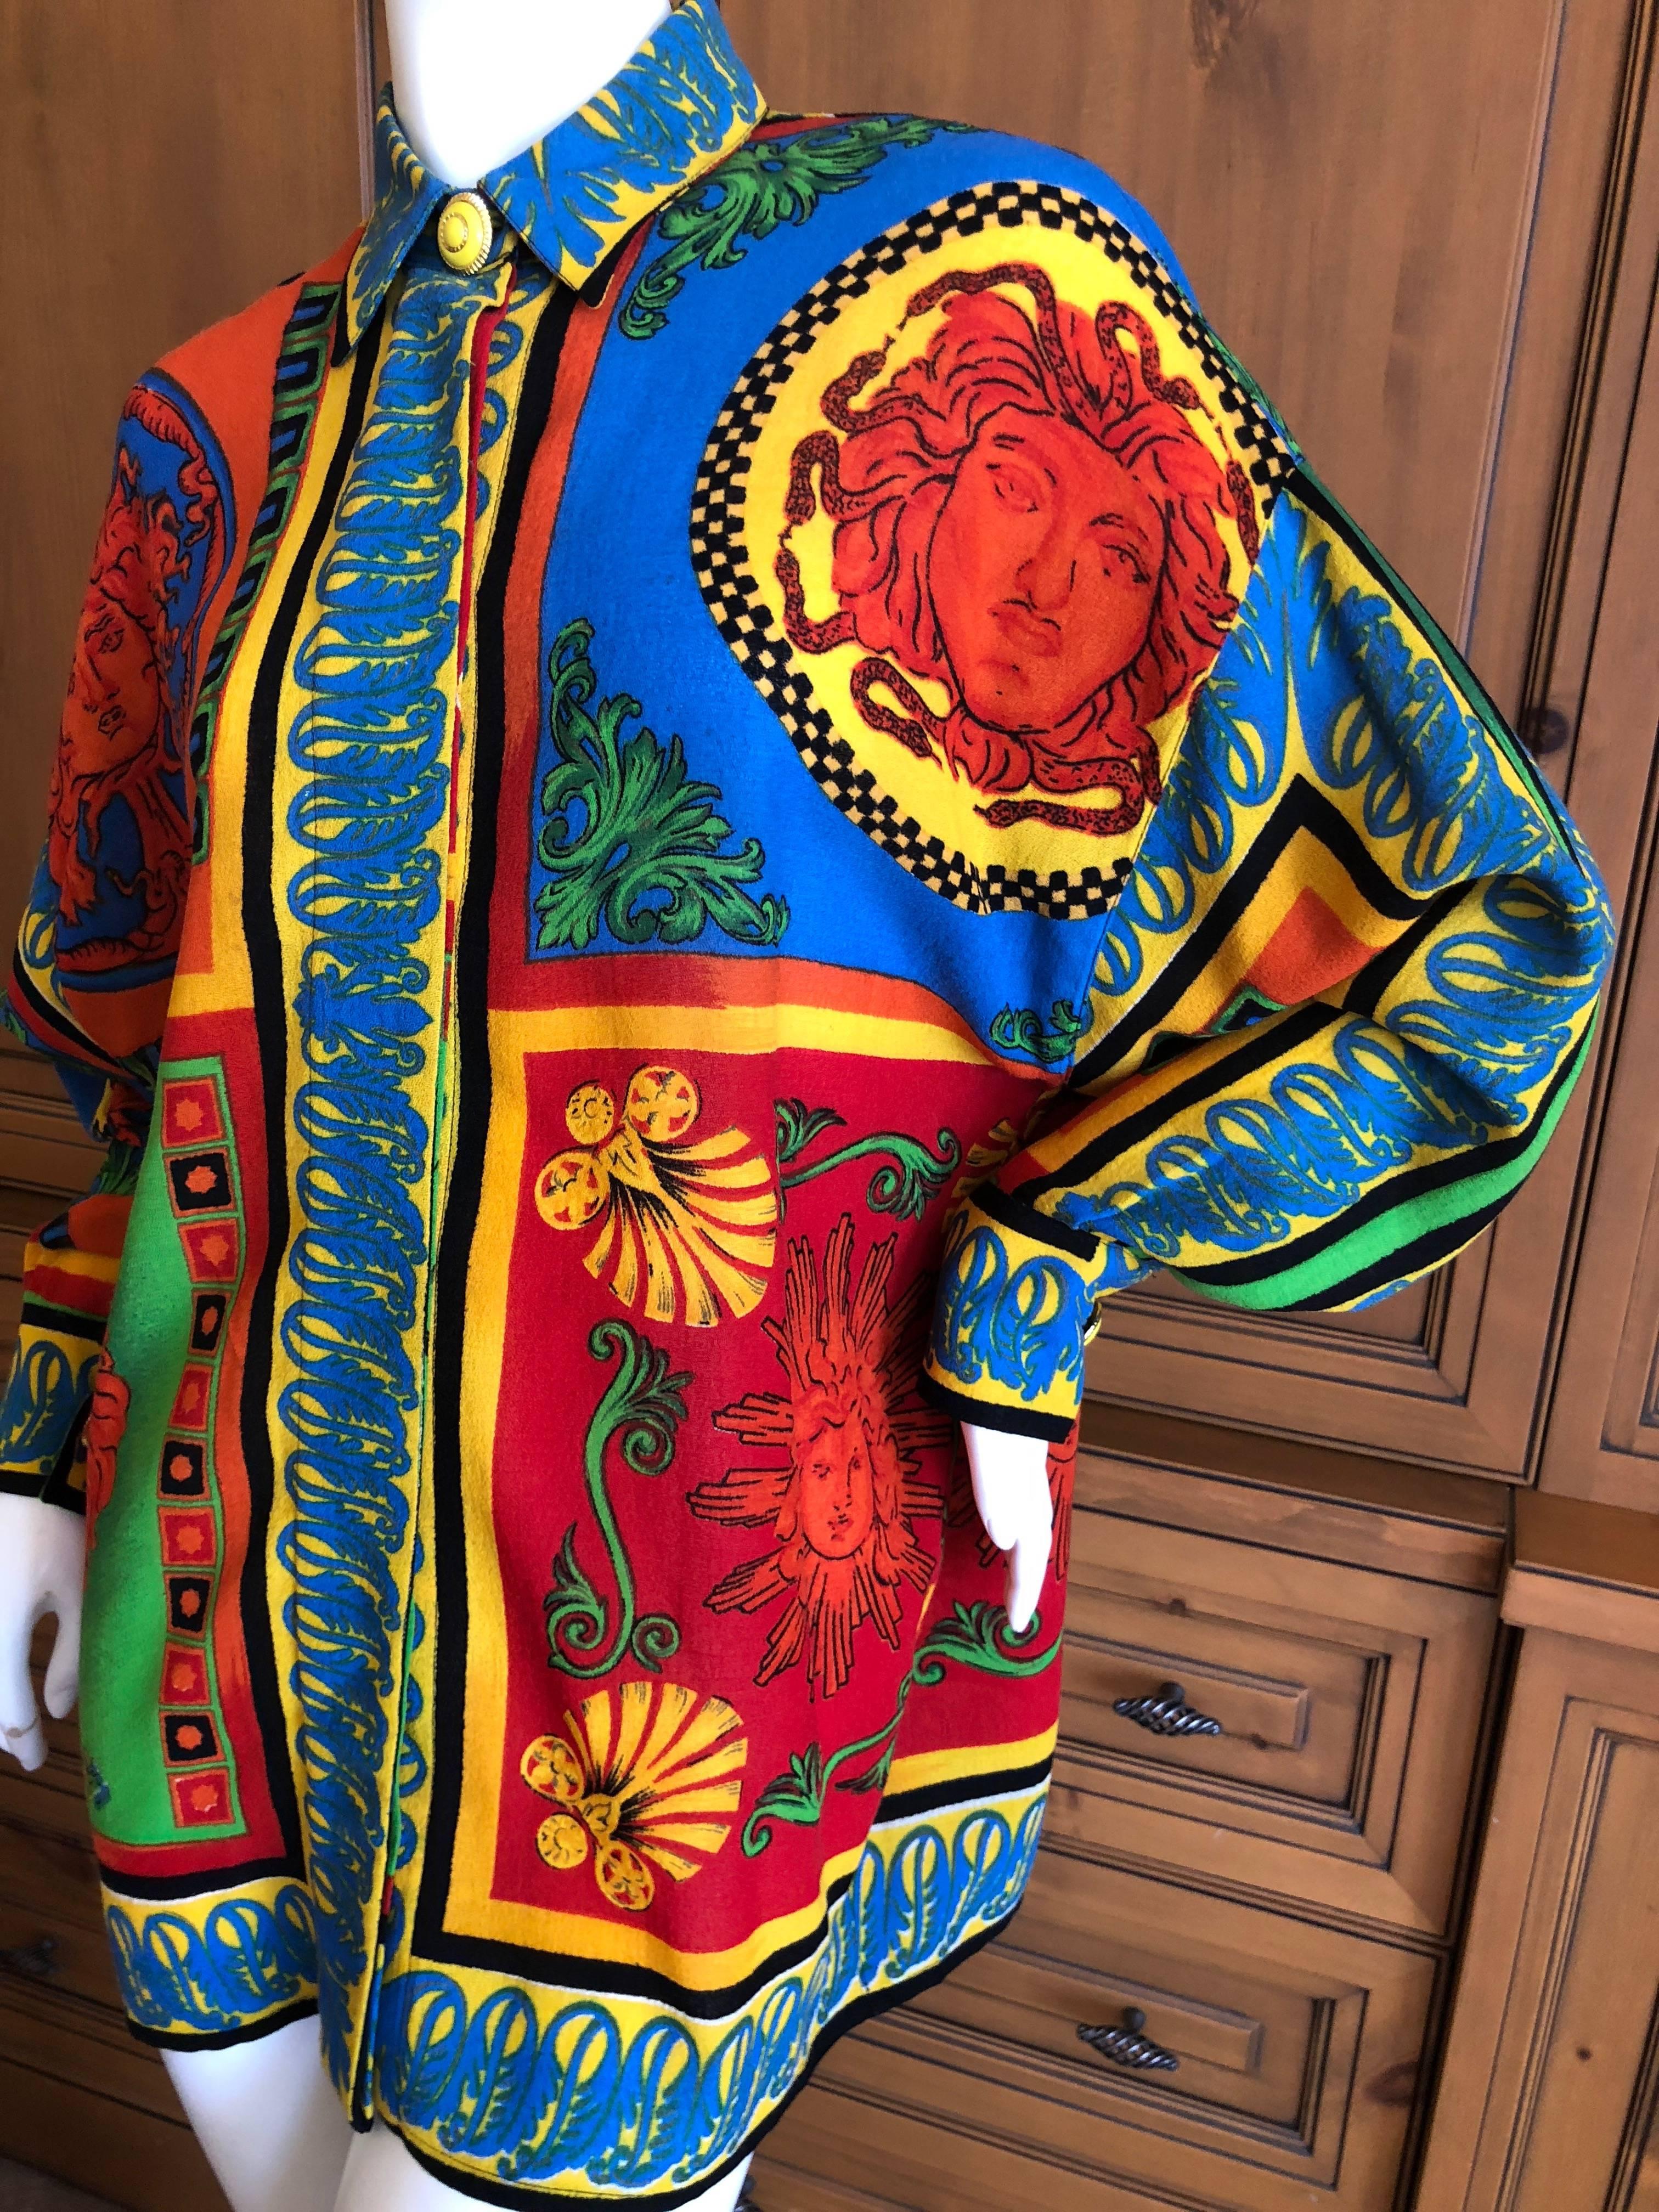 Gianni Versace Vintage Atelier Versace Silk Crepe Medusa Head Blouse, 1992   In Excellent Condition For Sale In Cloverdale, CA